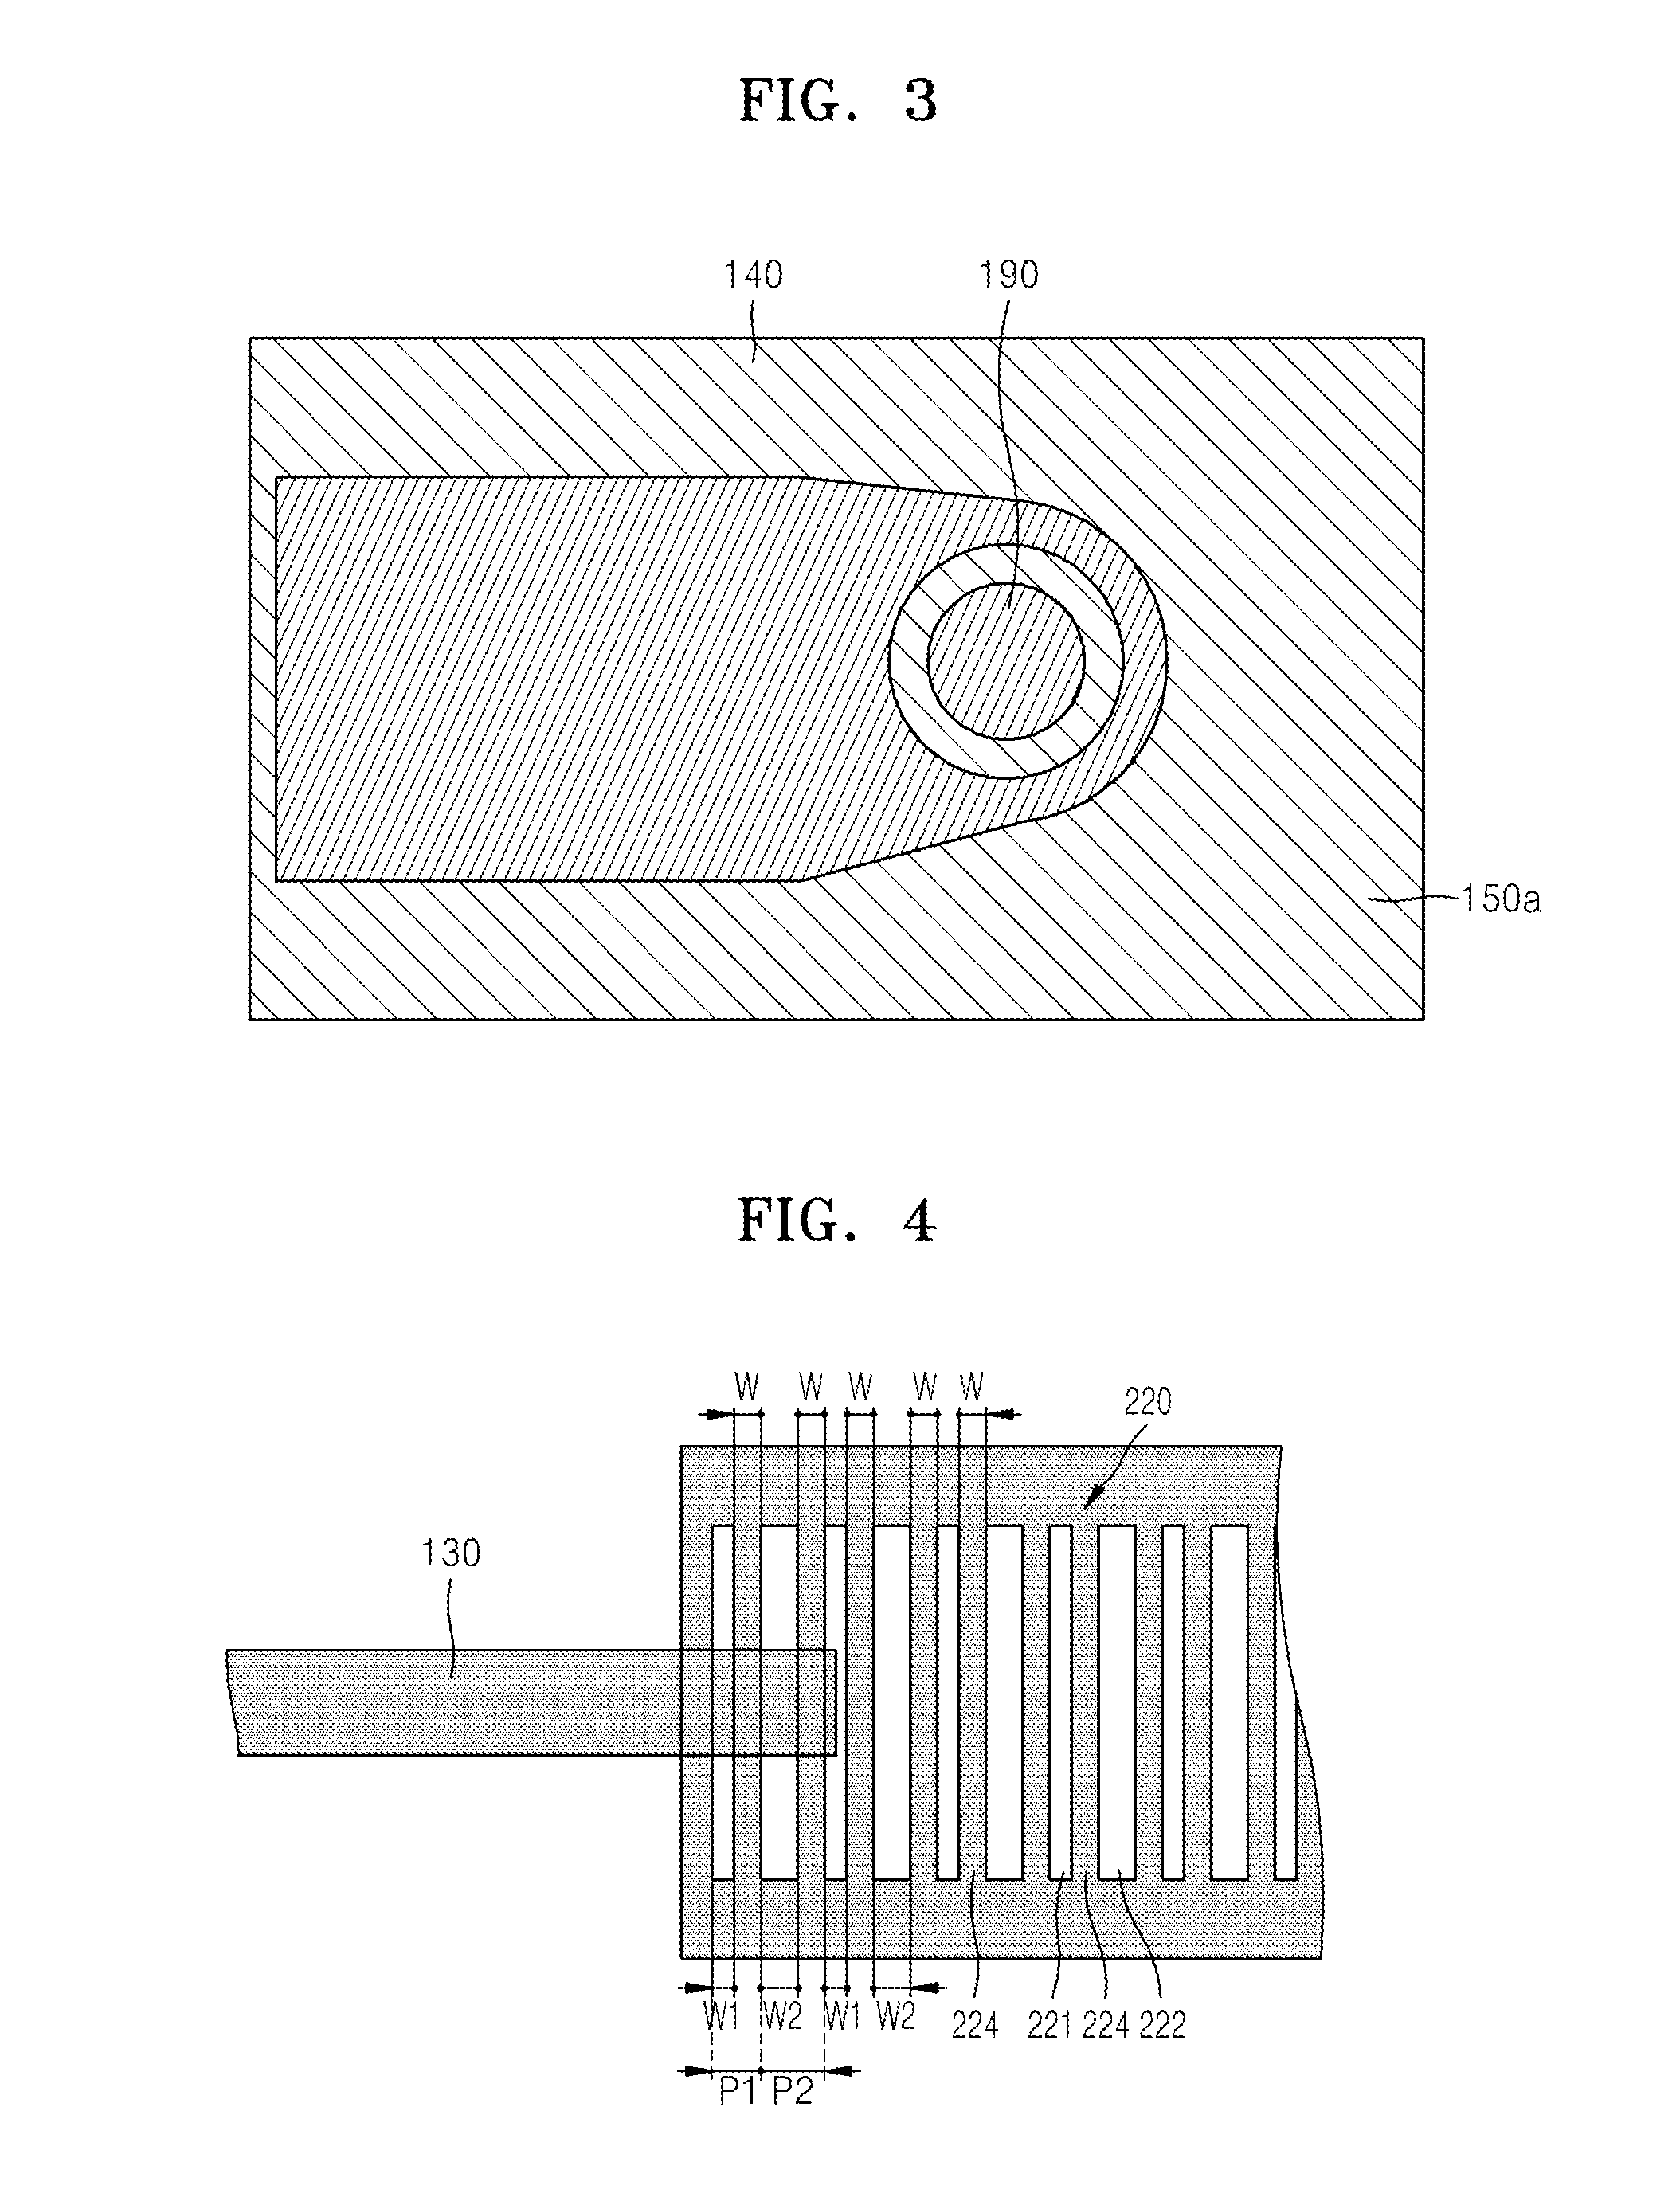 Hybrid vertical cavity laser and method of manufacturing the same